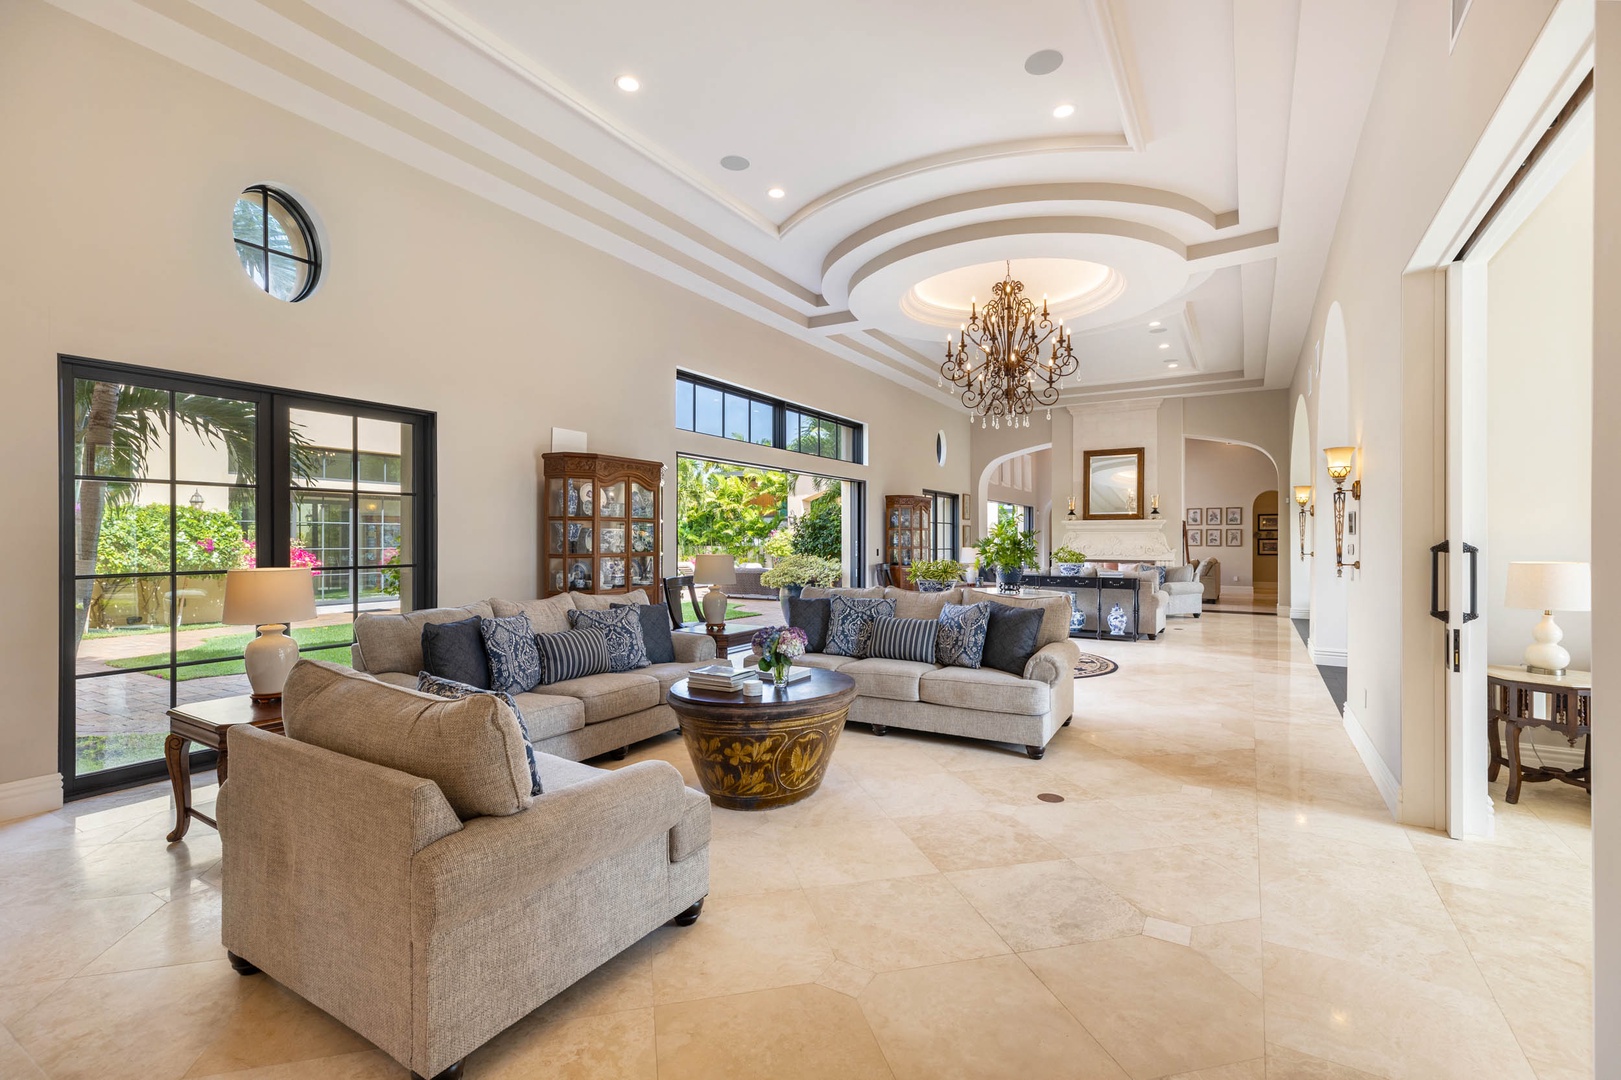 Honolulu Vacation Rentals, The Kahala Mansion - Spacious and comfortable formal living area with modern sofas perfect for gatherings.